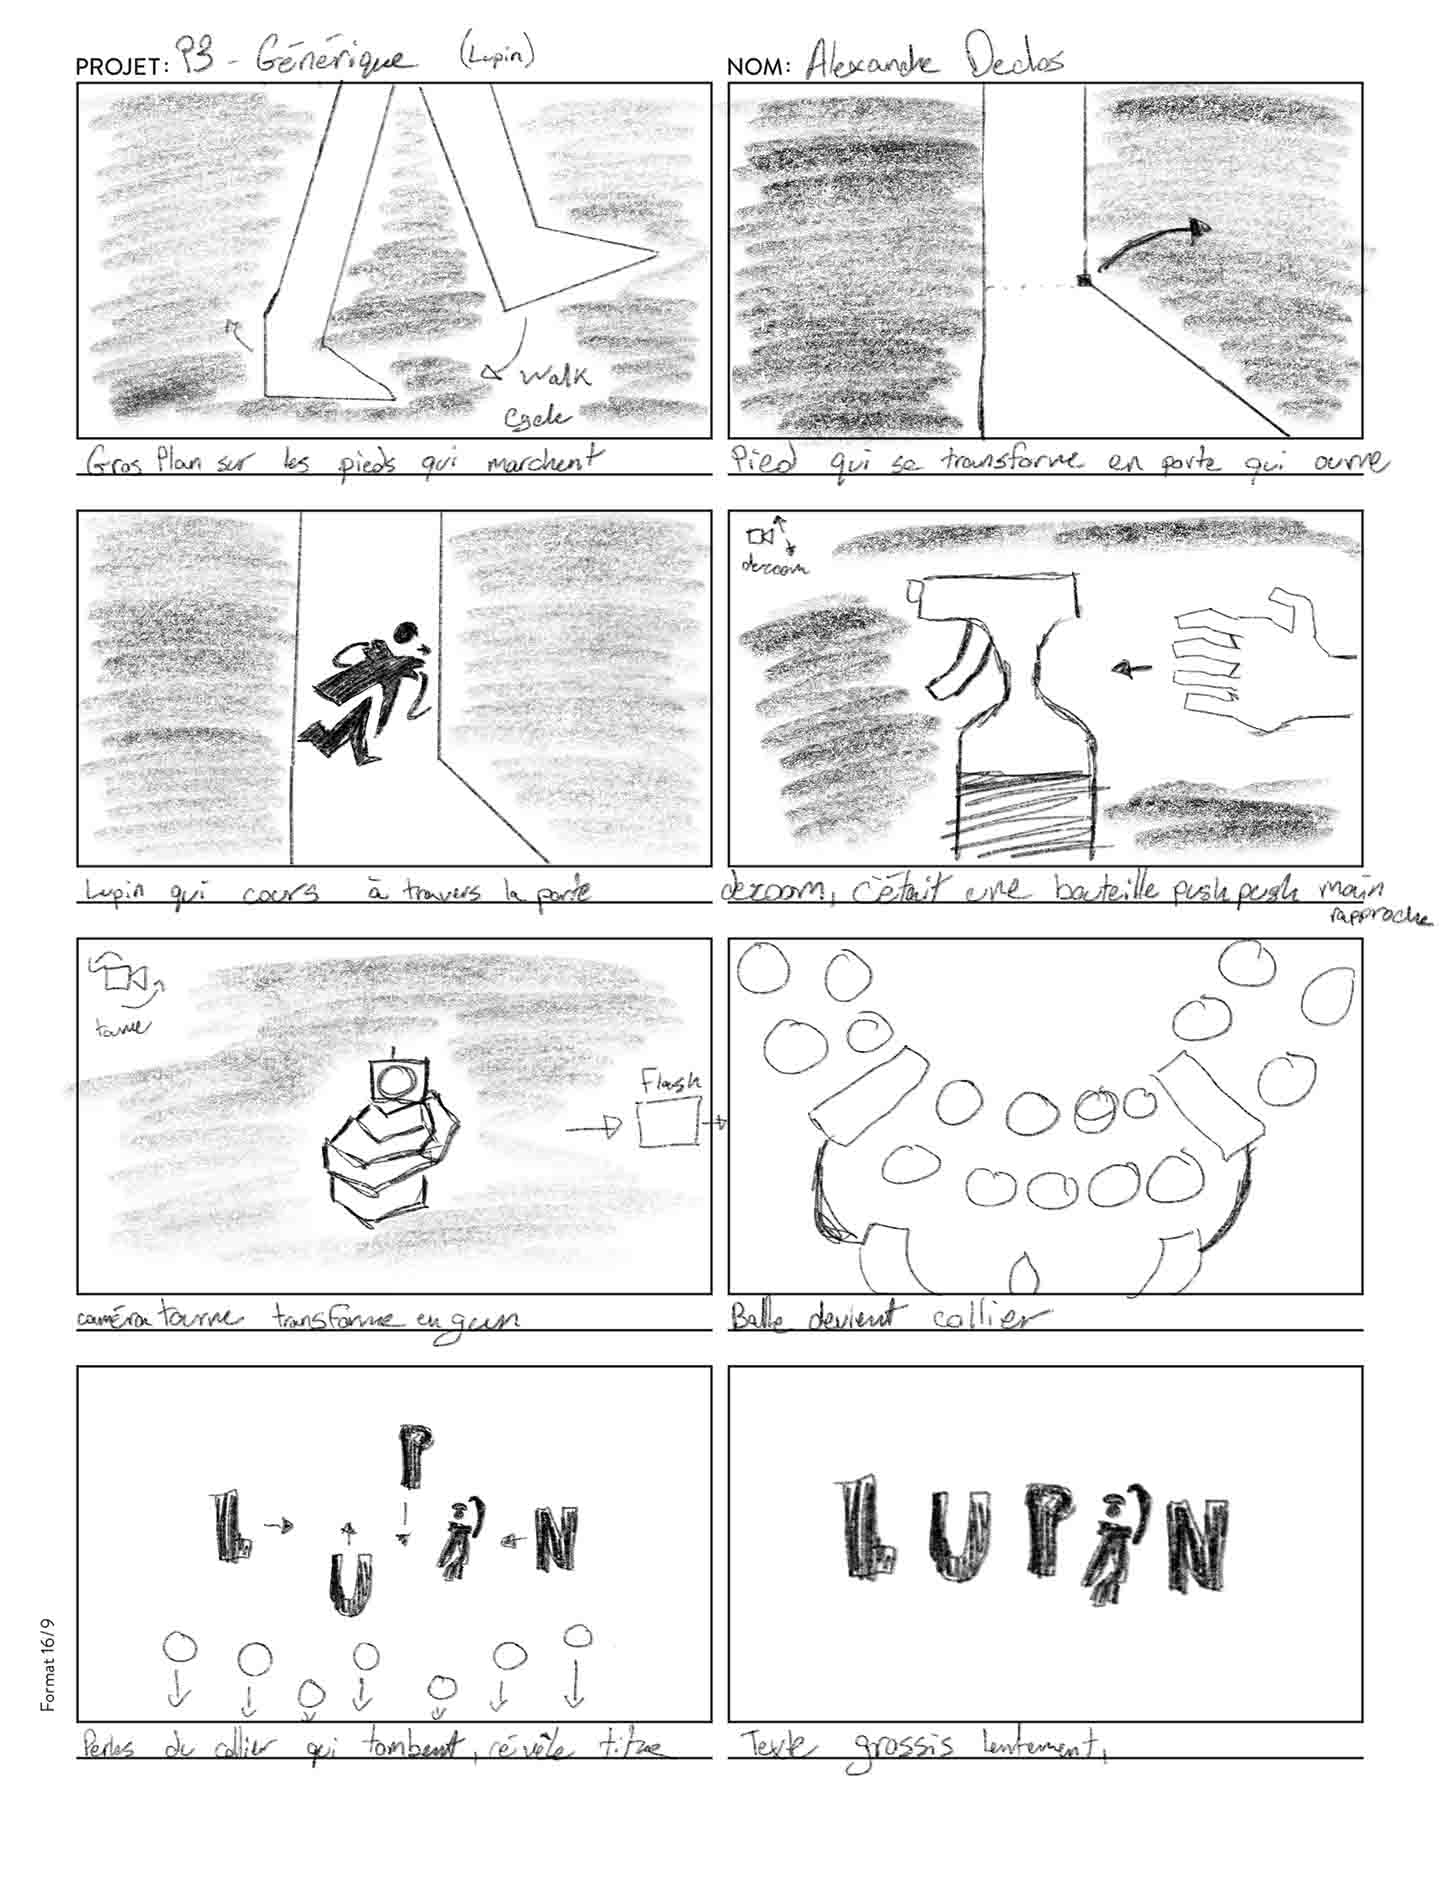 A storyboard of the Lupin Opening Title Sequence Motion Design video